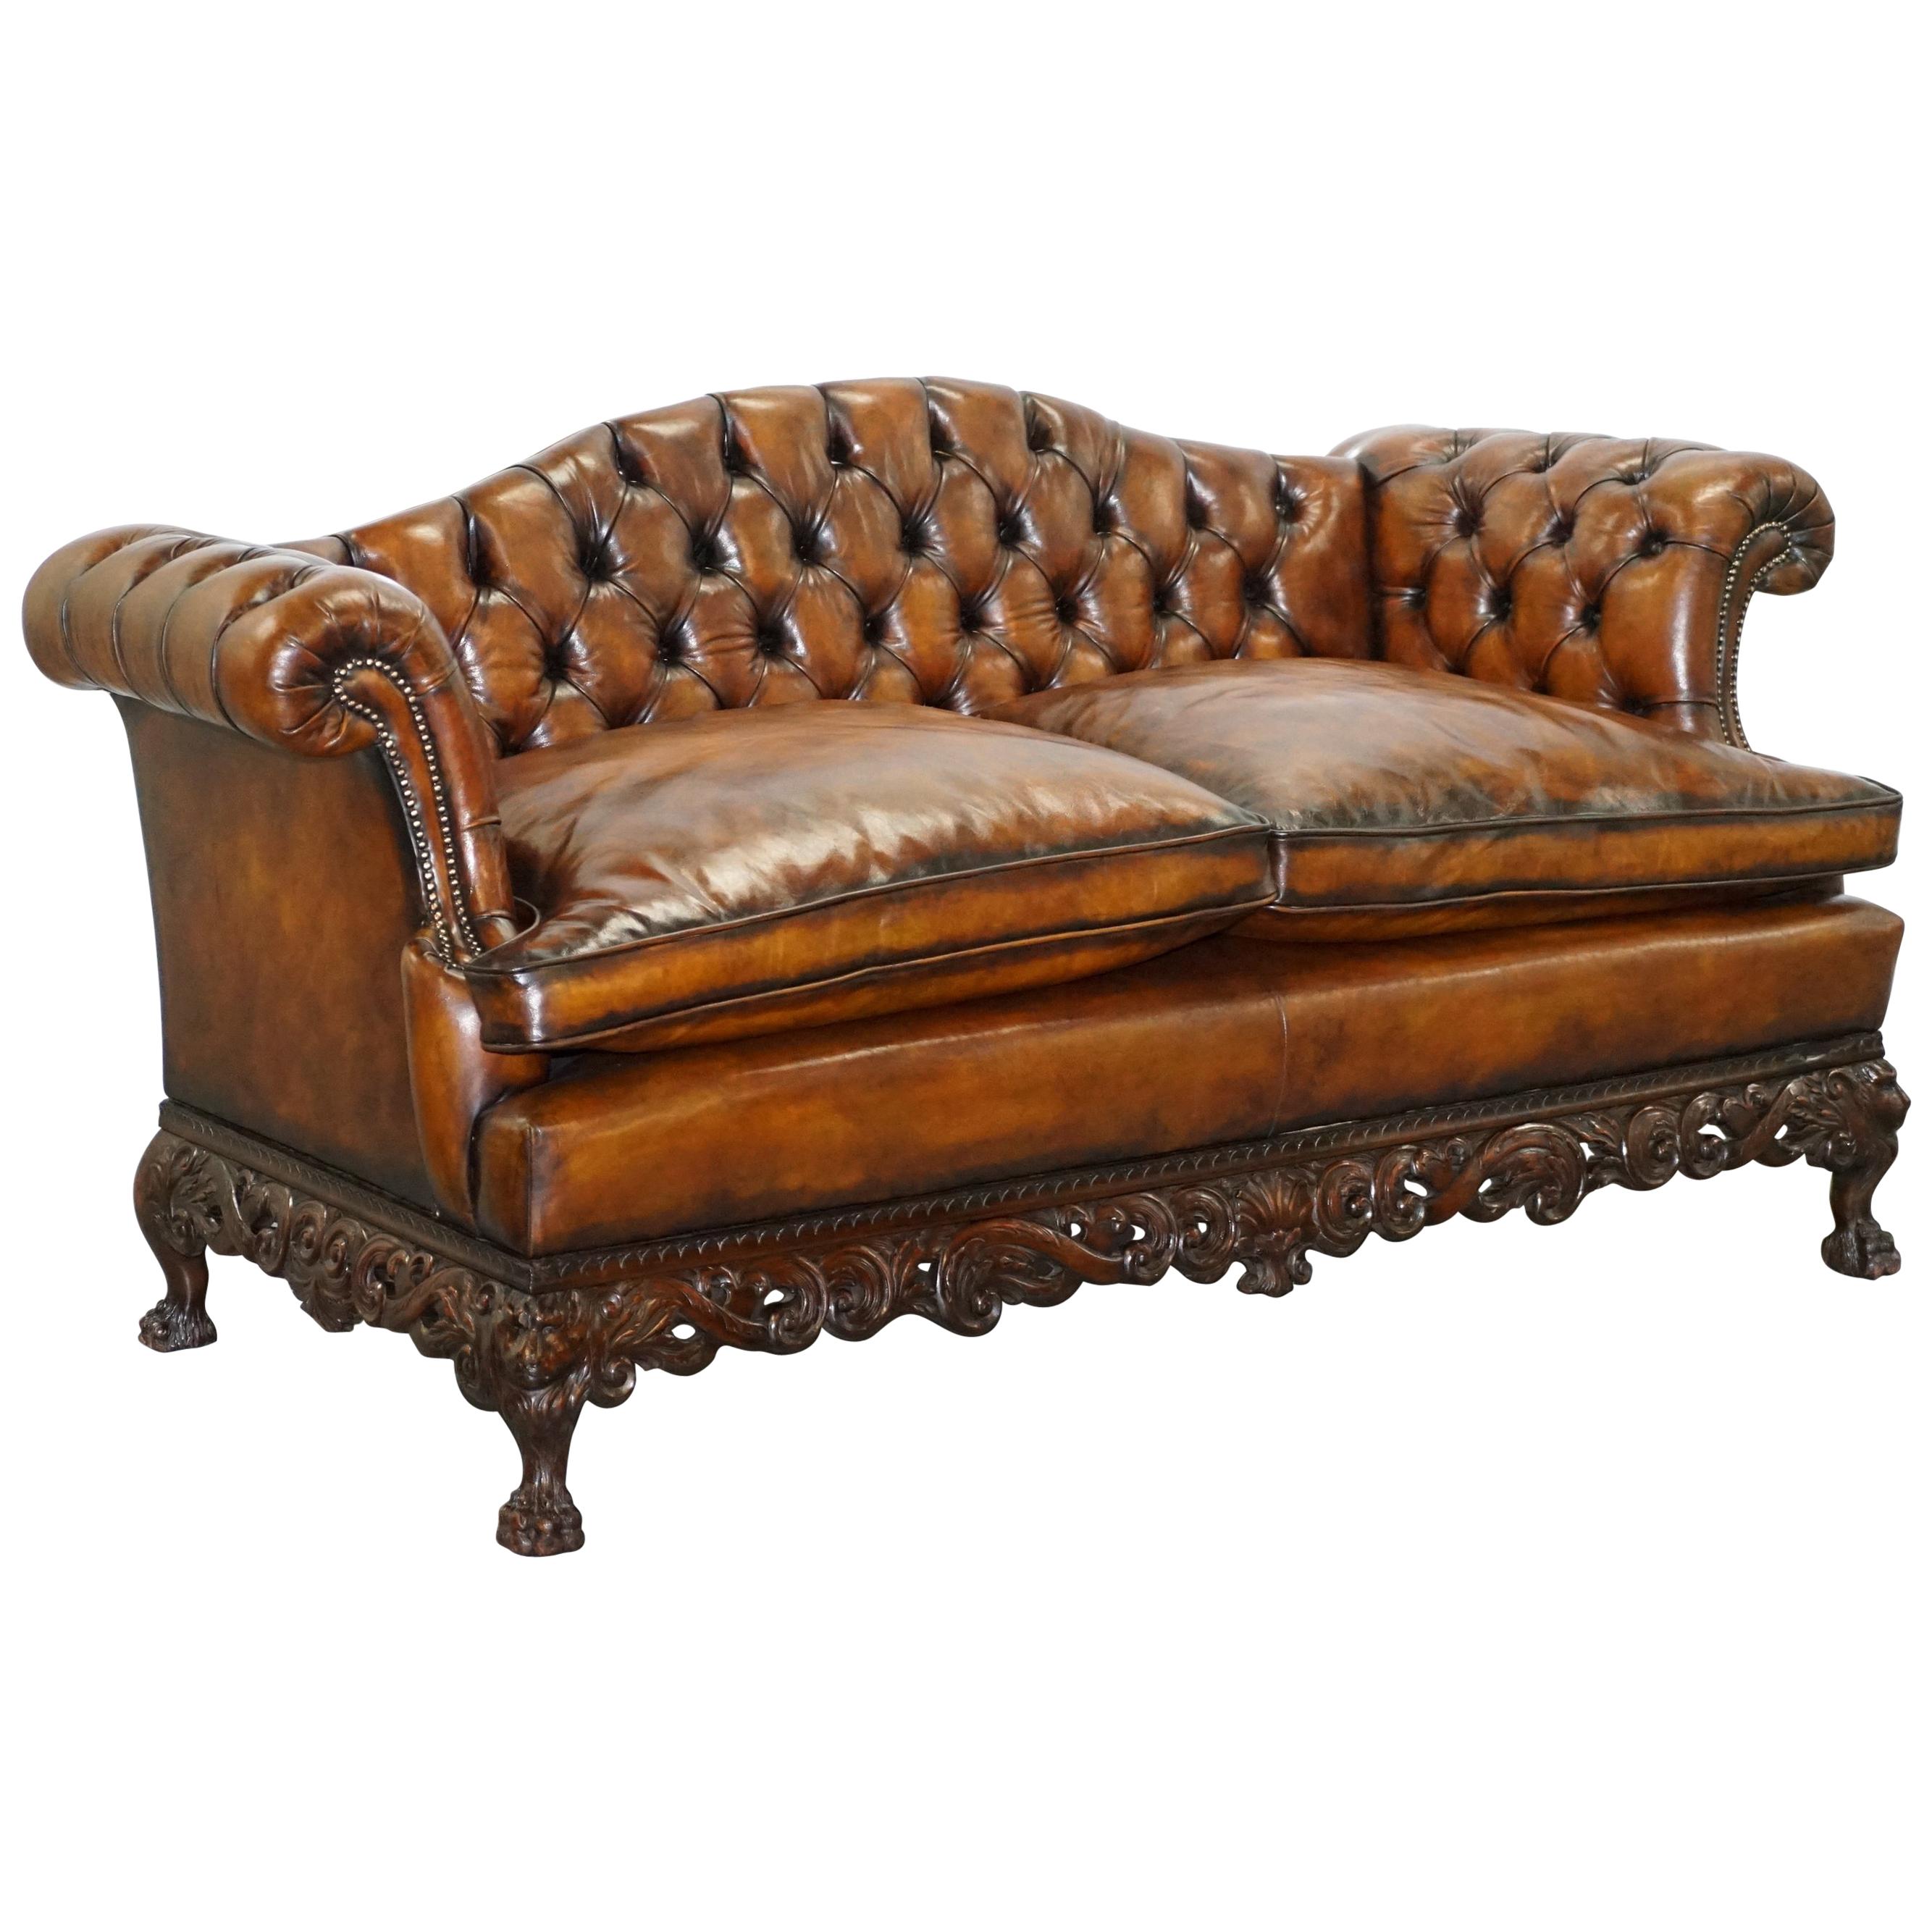 Victorian Restored Chesterfield Hand Dyed Brown Leather Sofa Lion Hairy Paw Feet